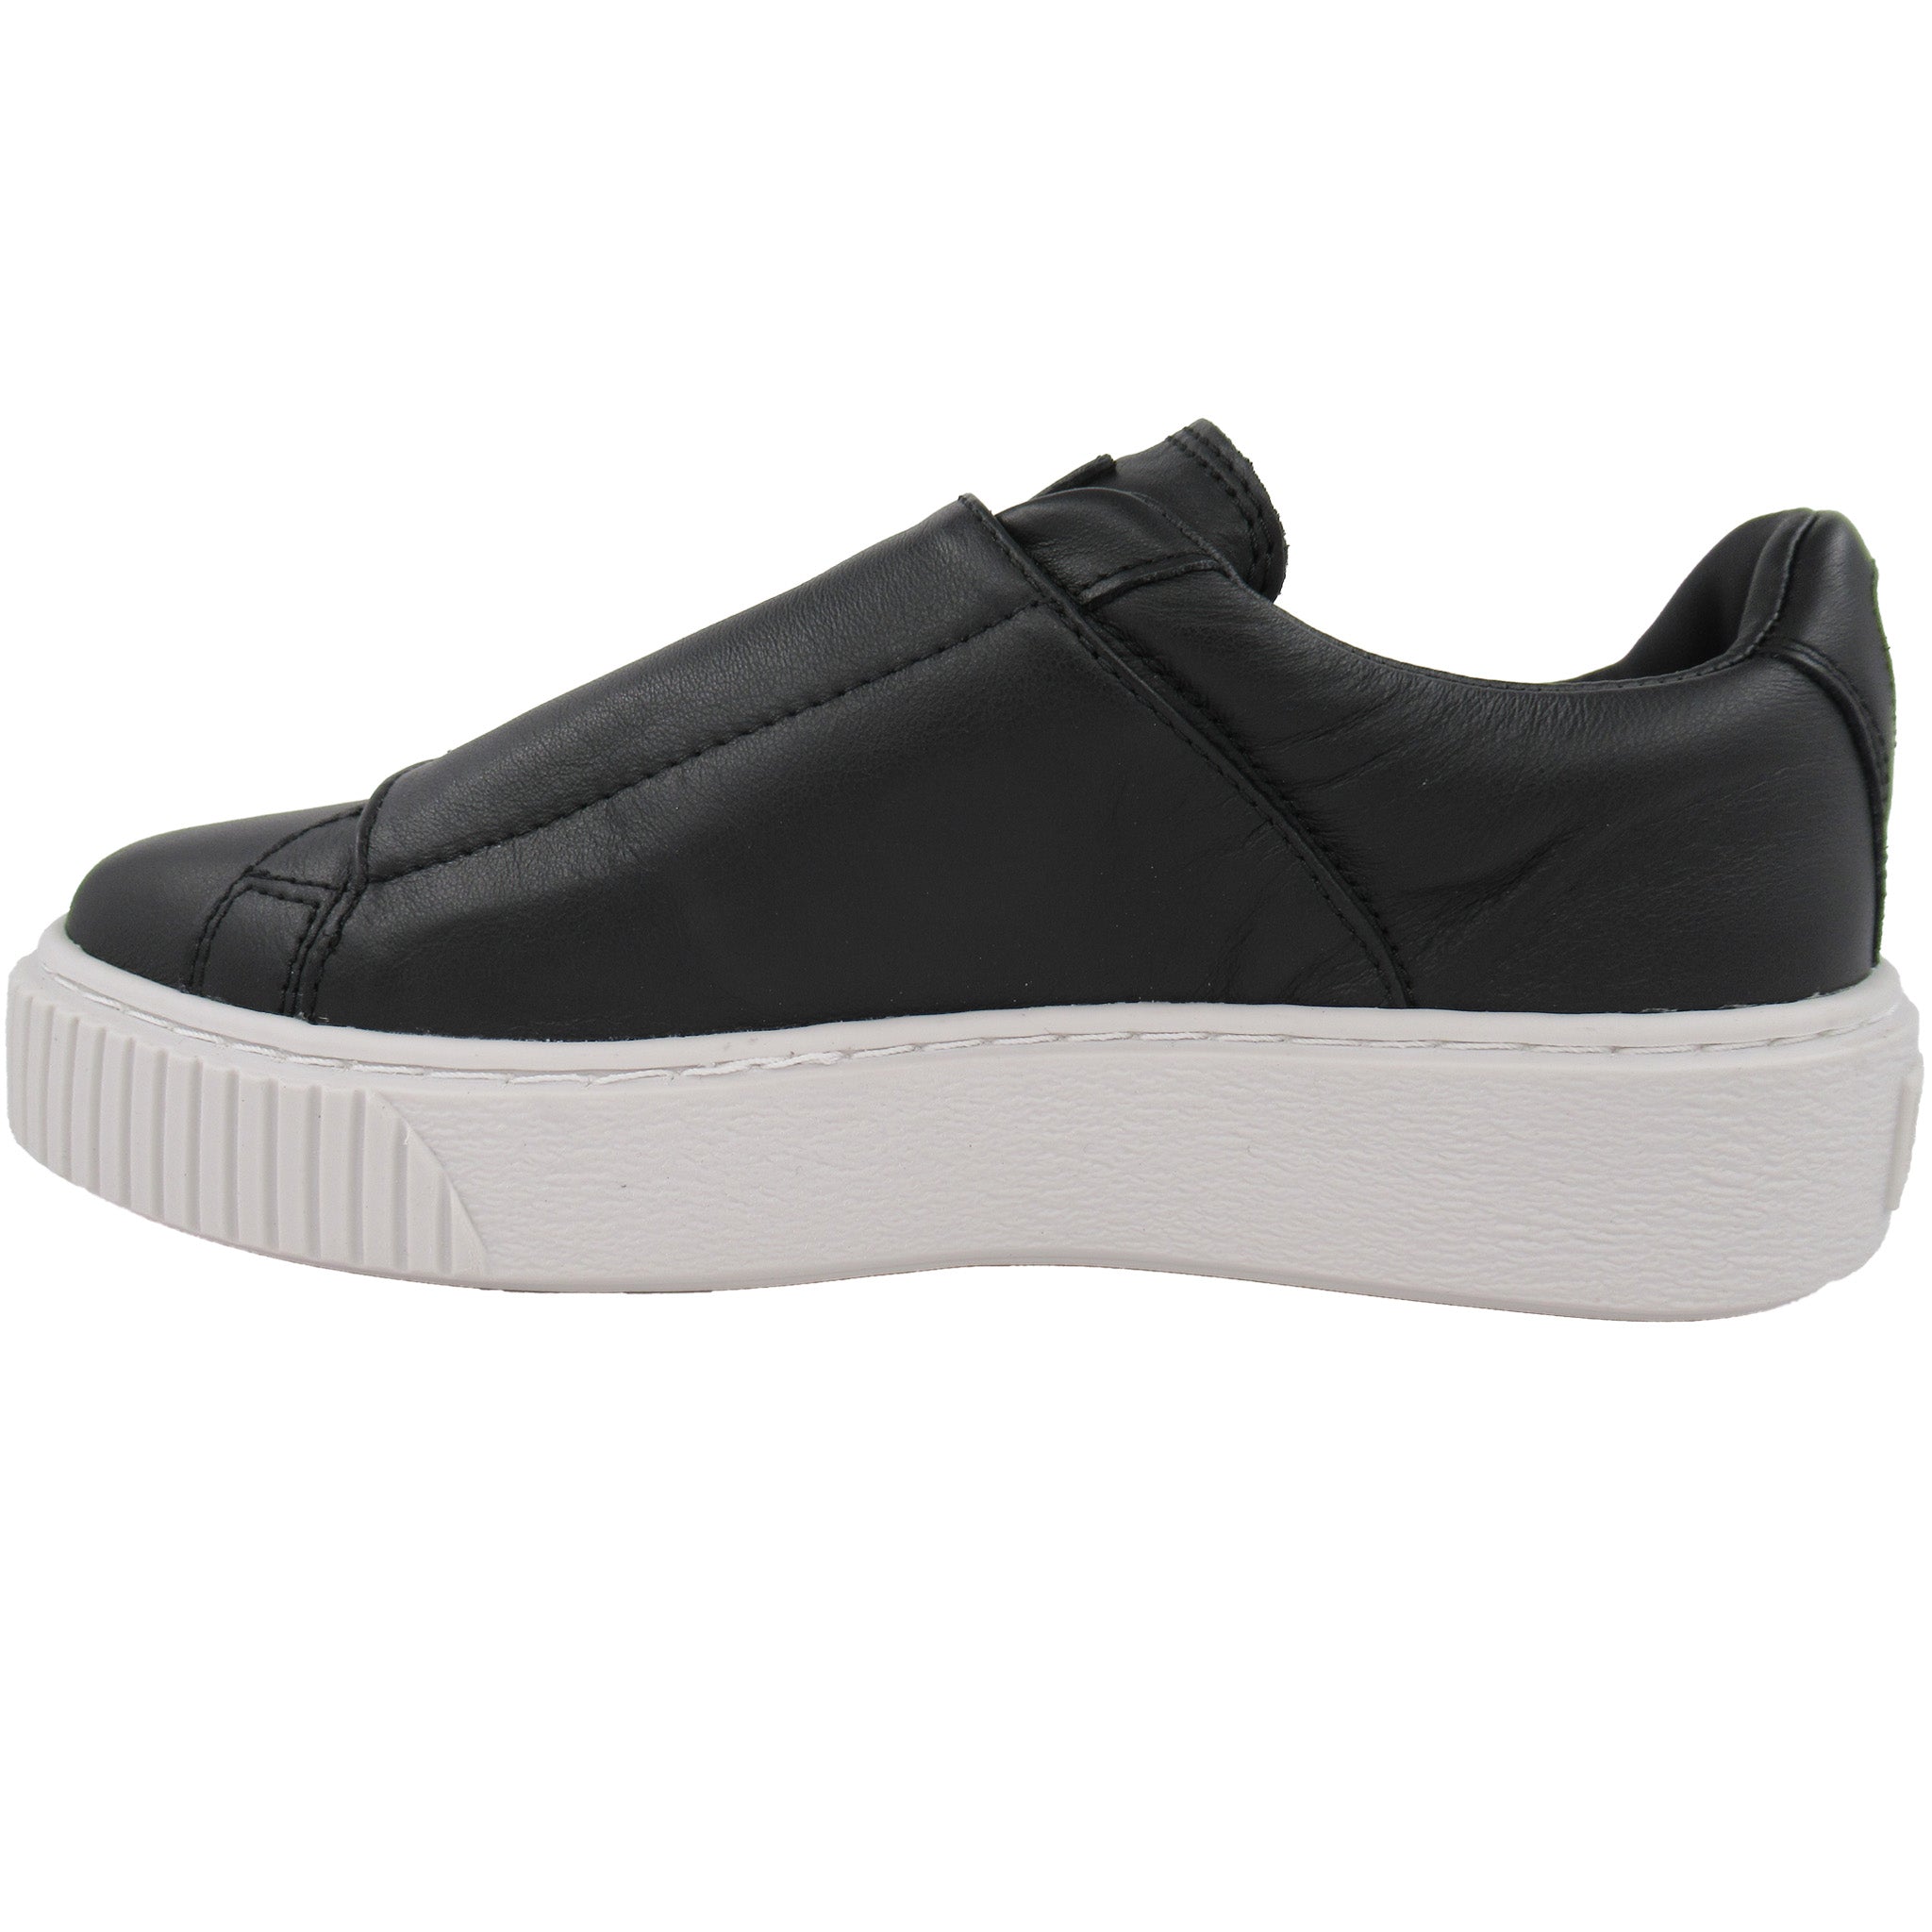 Puma Women's Platform – That Shoe Store and More